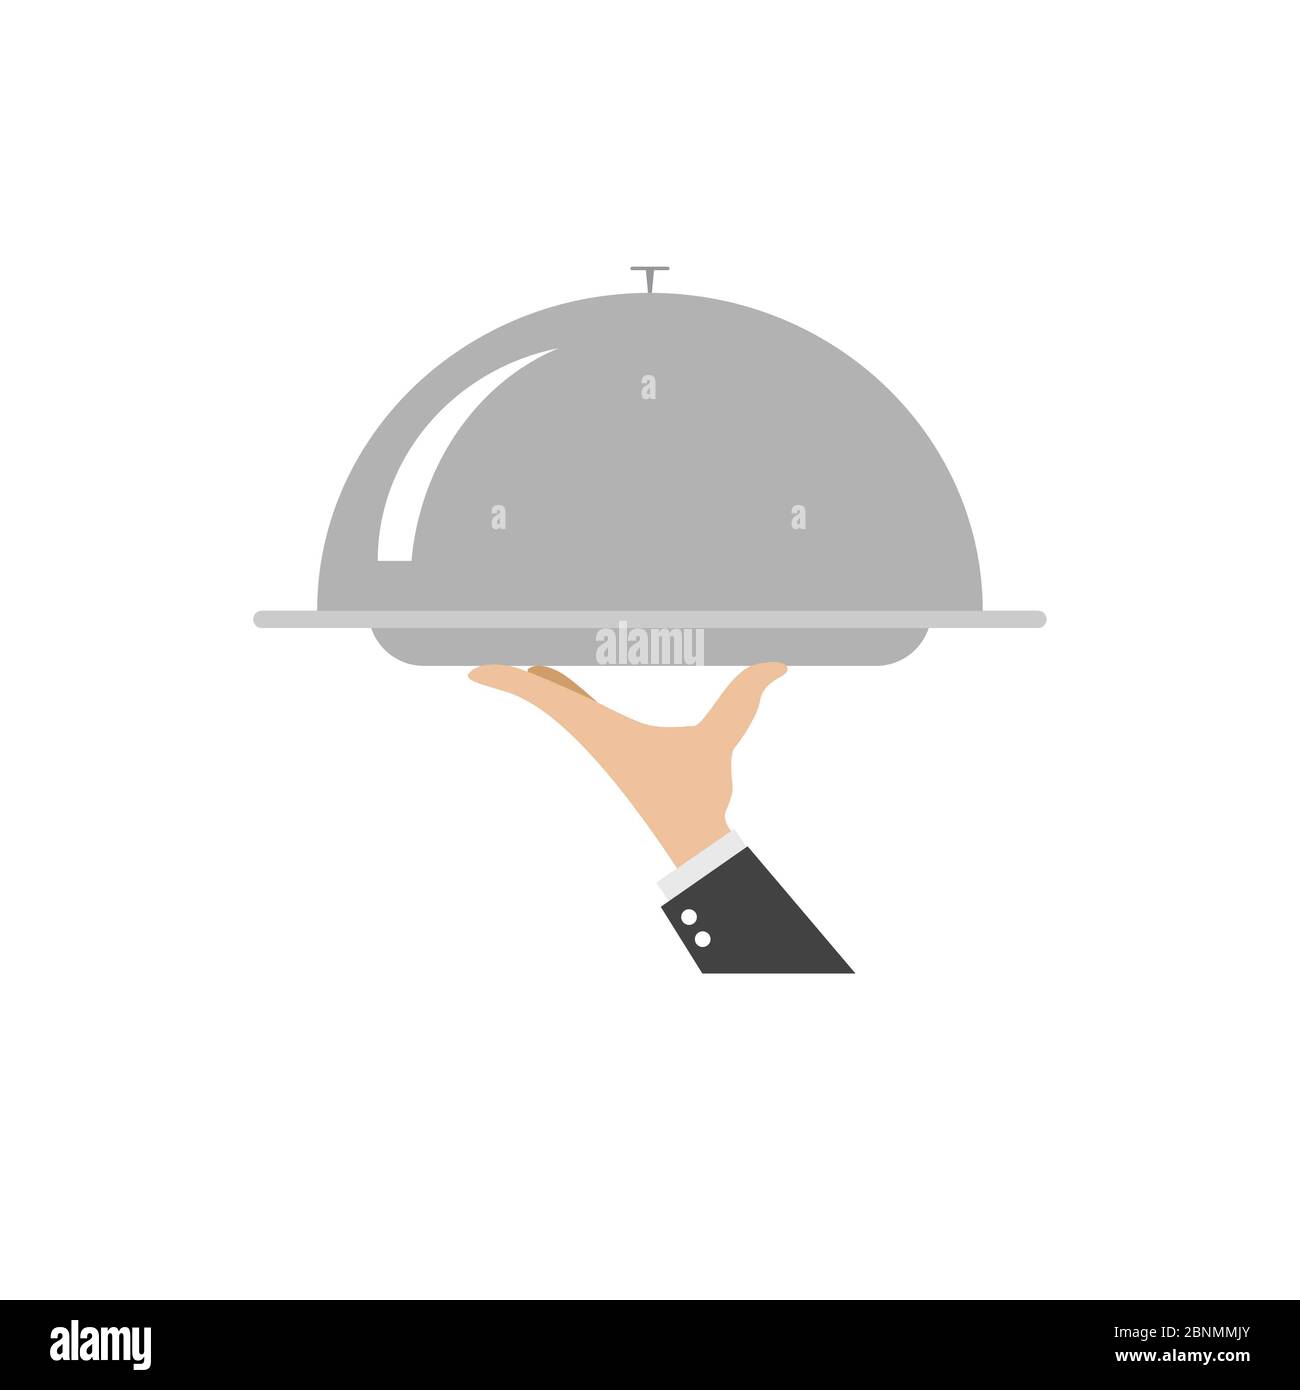 tray on the hand icon vector illustration on the white background, vector Stock Photo